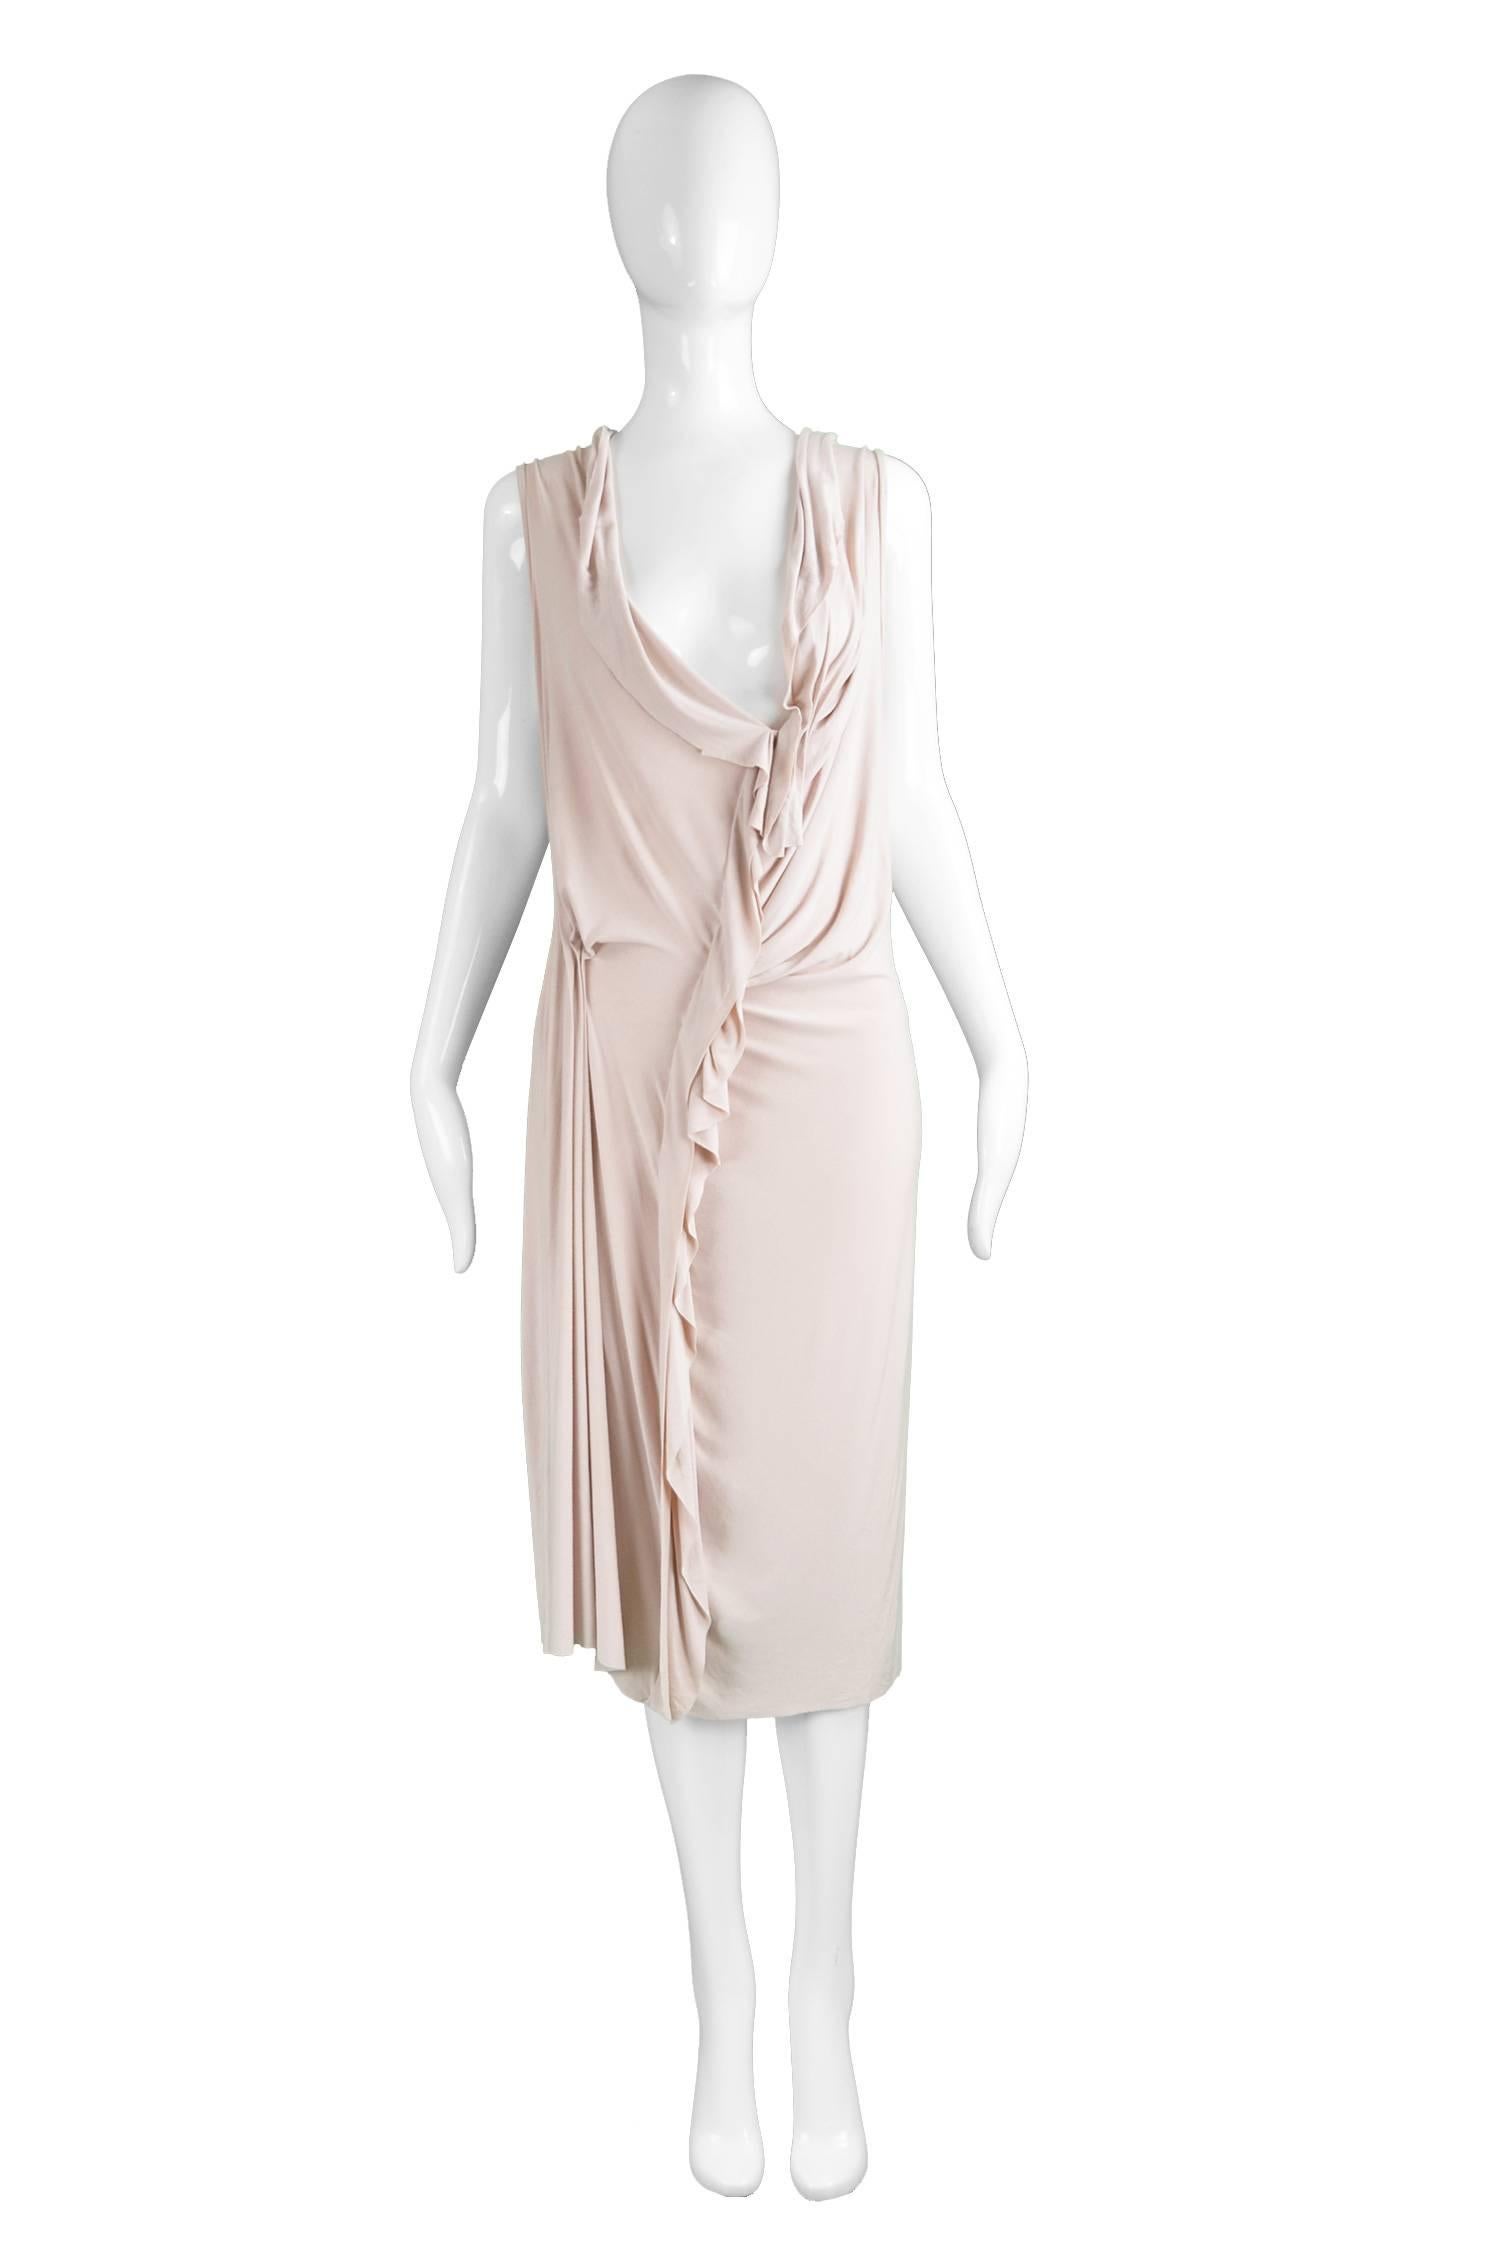 Anne Valérie Hash Blush Pink Ruffled Draped Jersey Dress

Please Click +CONTINUE READING to see measurements, description and condition. 

Size: Marked M
Bust - Up to 42” / 106cm (has a loose bust that is meant to drape open)
Waist - Stretches from